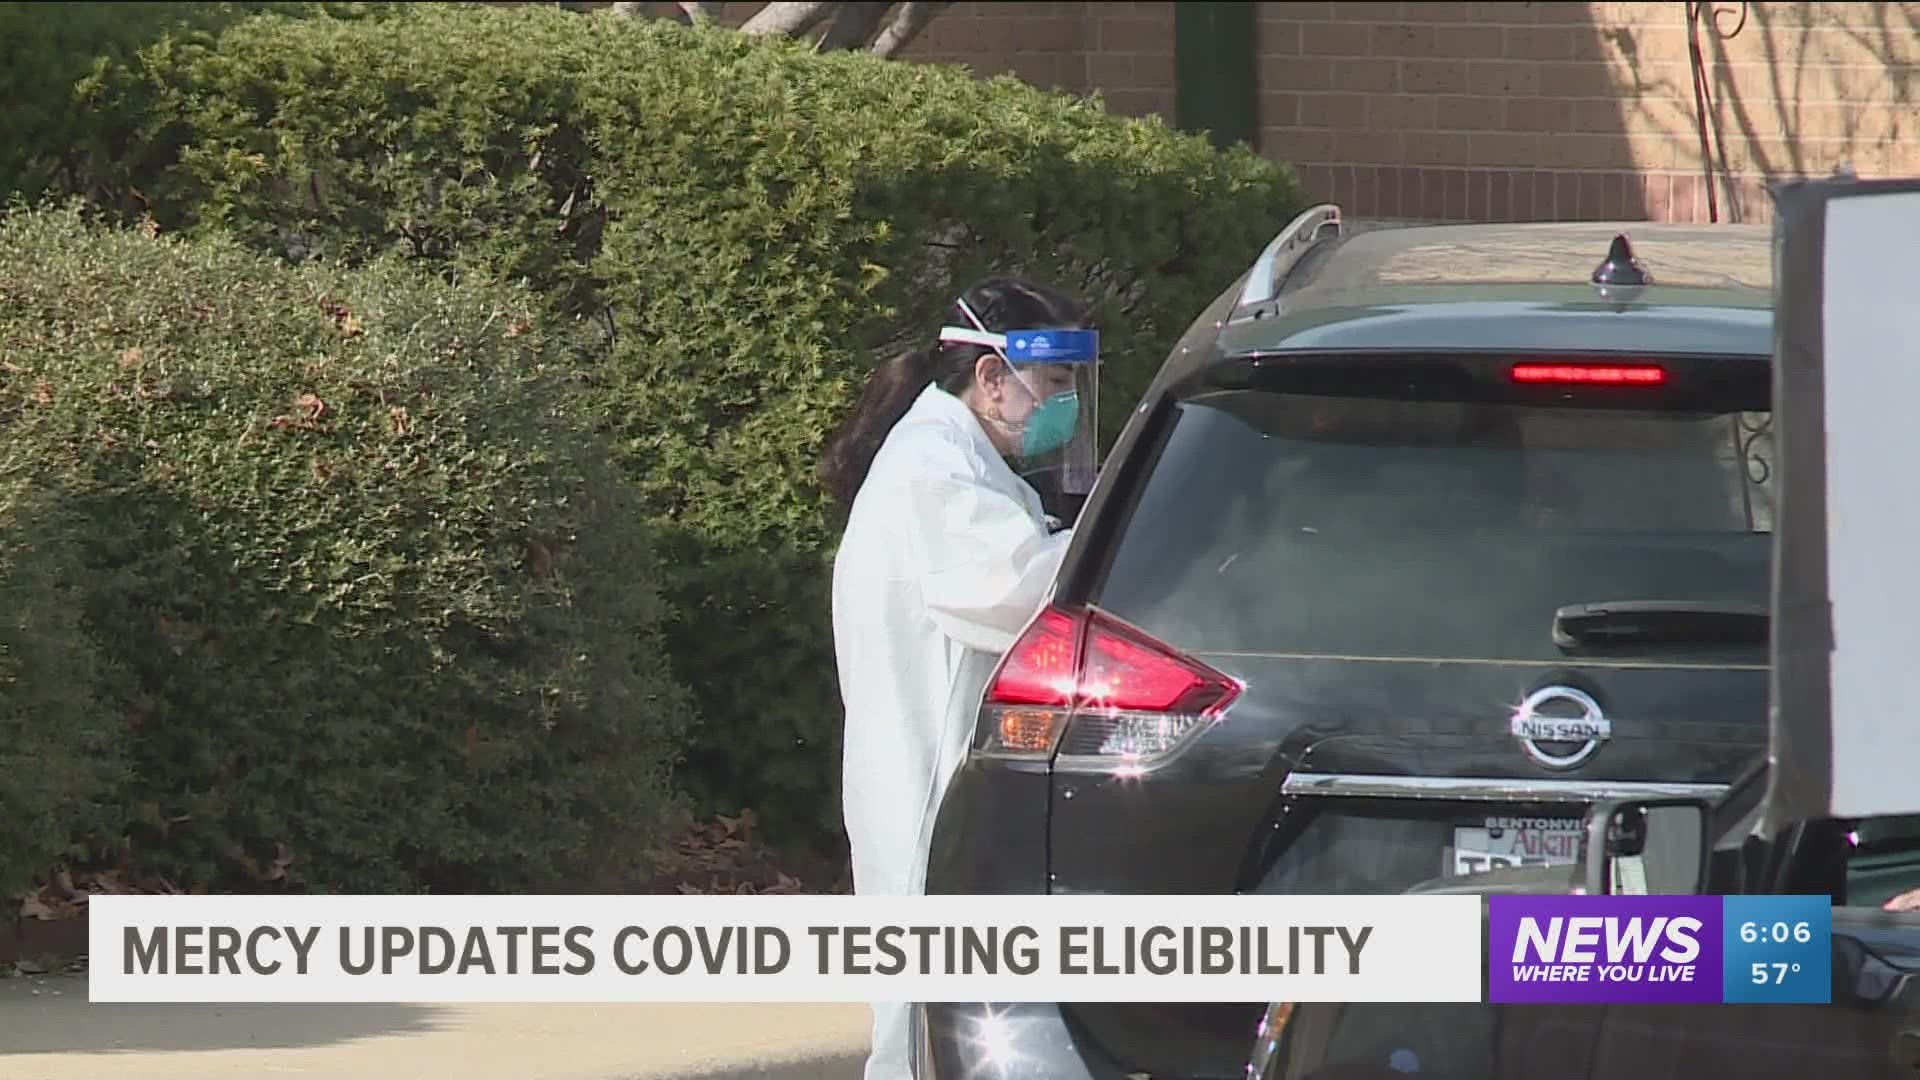 As testing supplies dwindle, Mercy Health is forced to make changes to who is eligible to receive a COVID test.